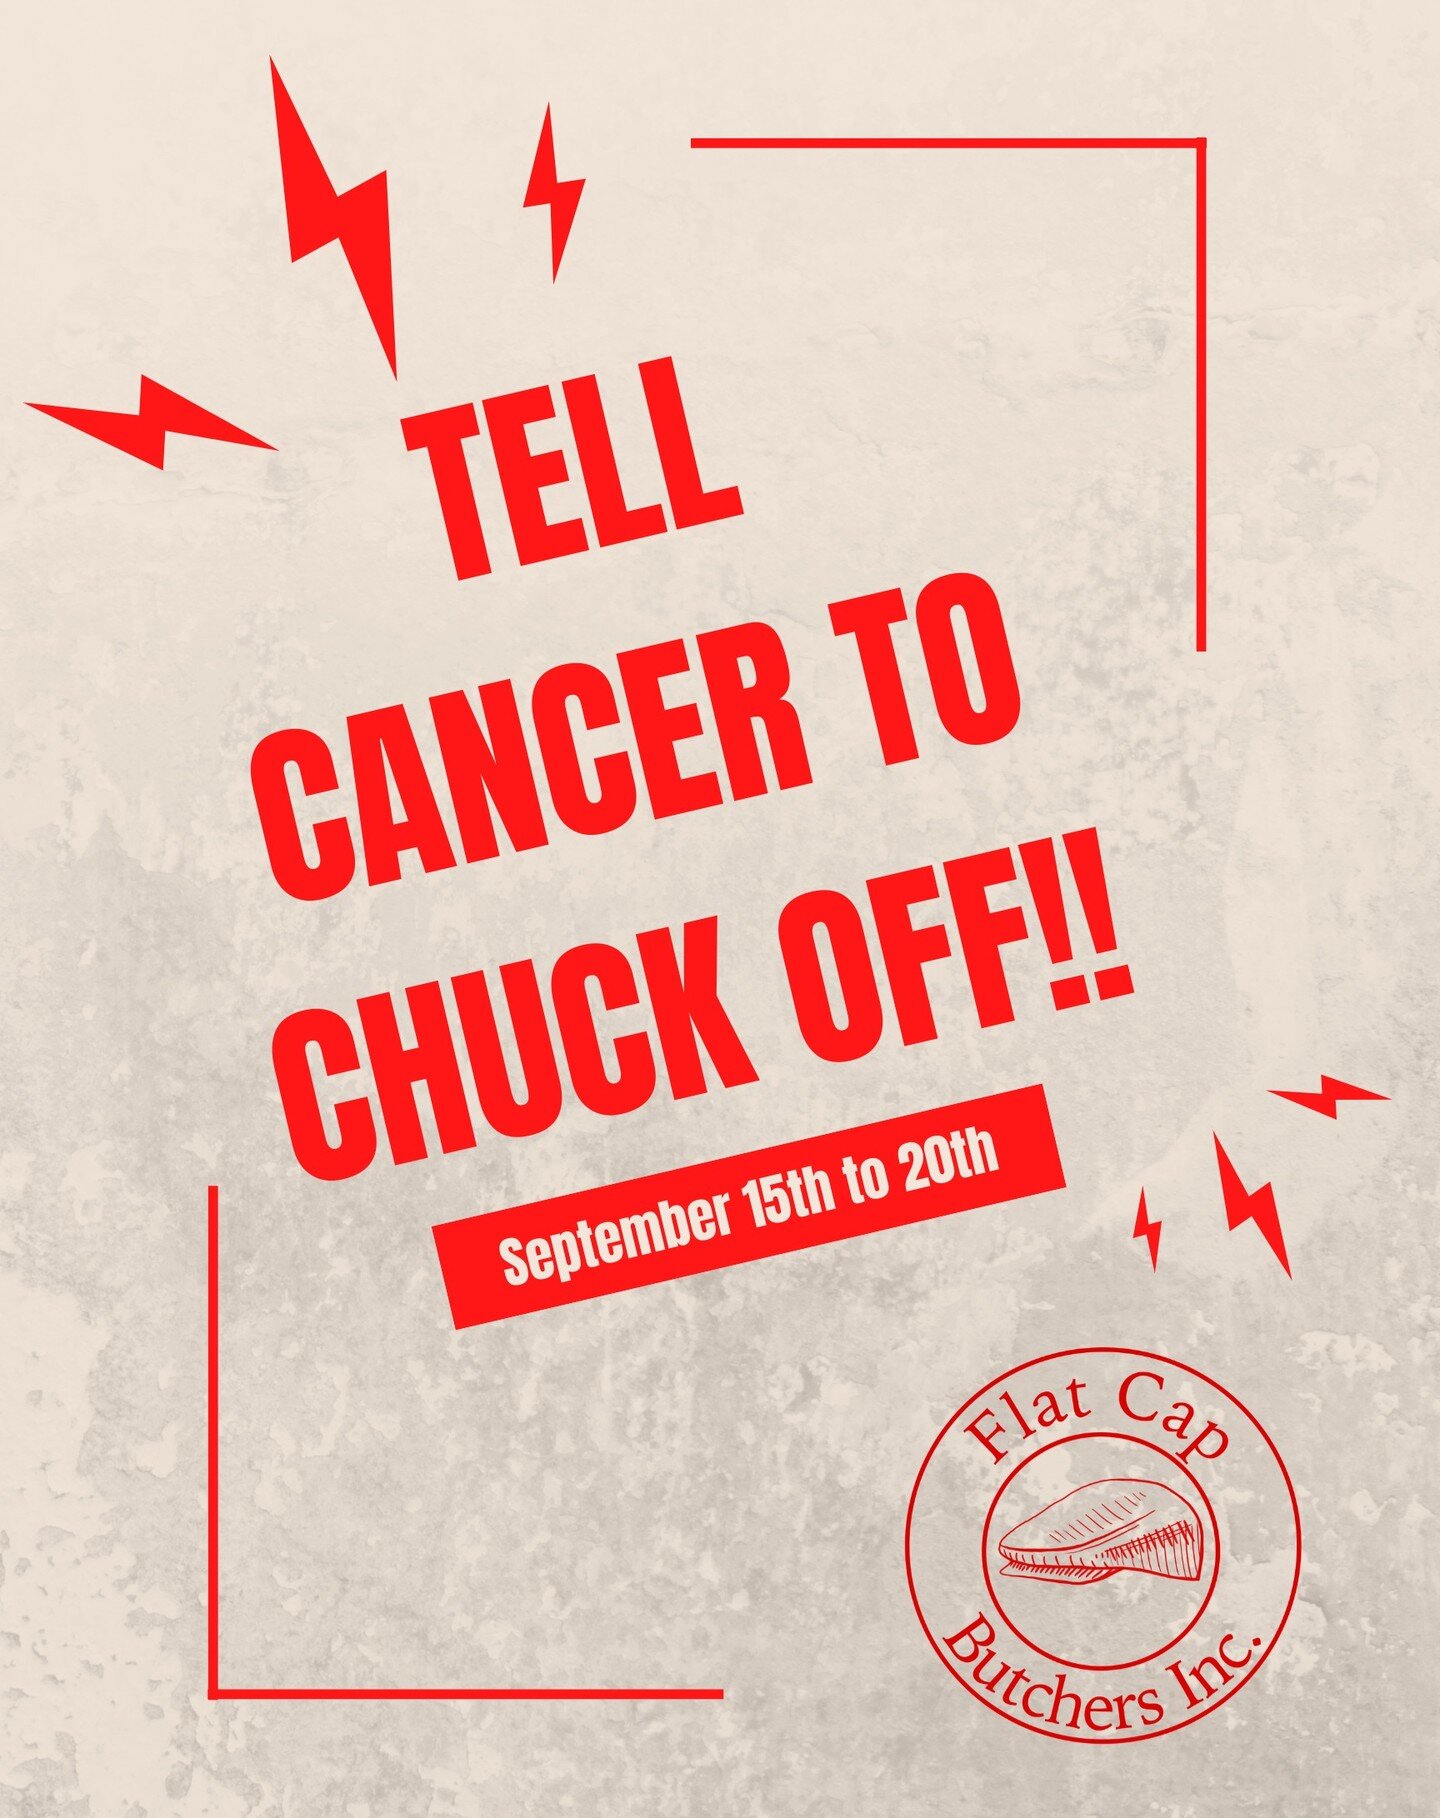 This week we will be donating 10% of all Chuck sales (this includes ground chuck, chuck roast, and our pulled beef products) to the Terry Fox Foundation. Stop by to fill your freezer and tell cancer to chuck off!